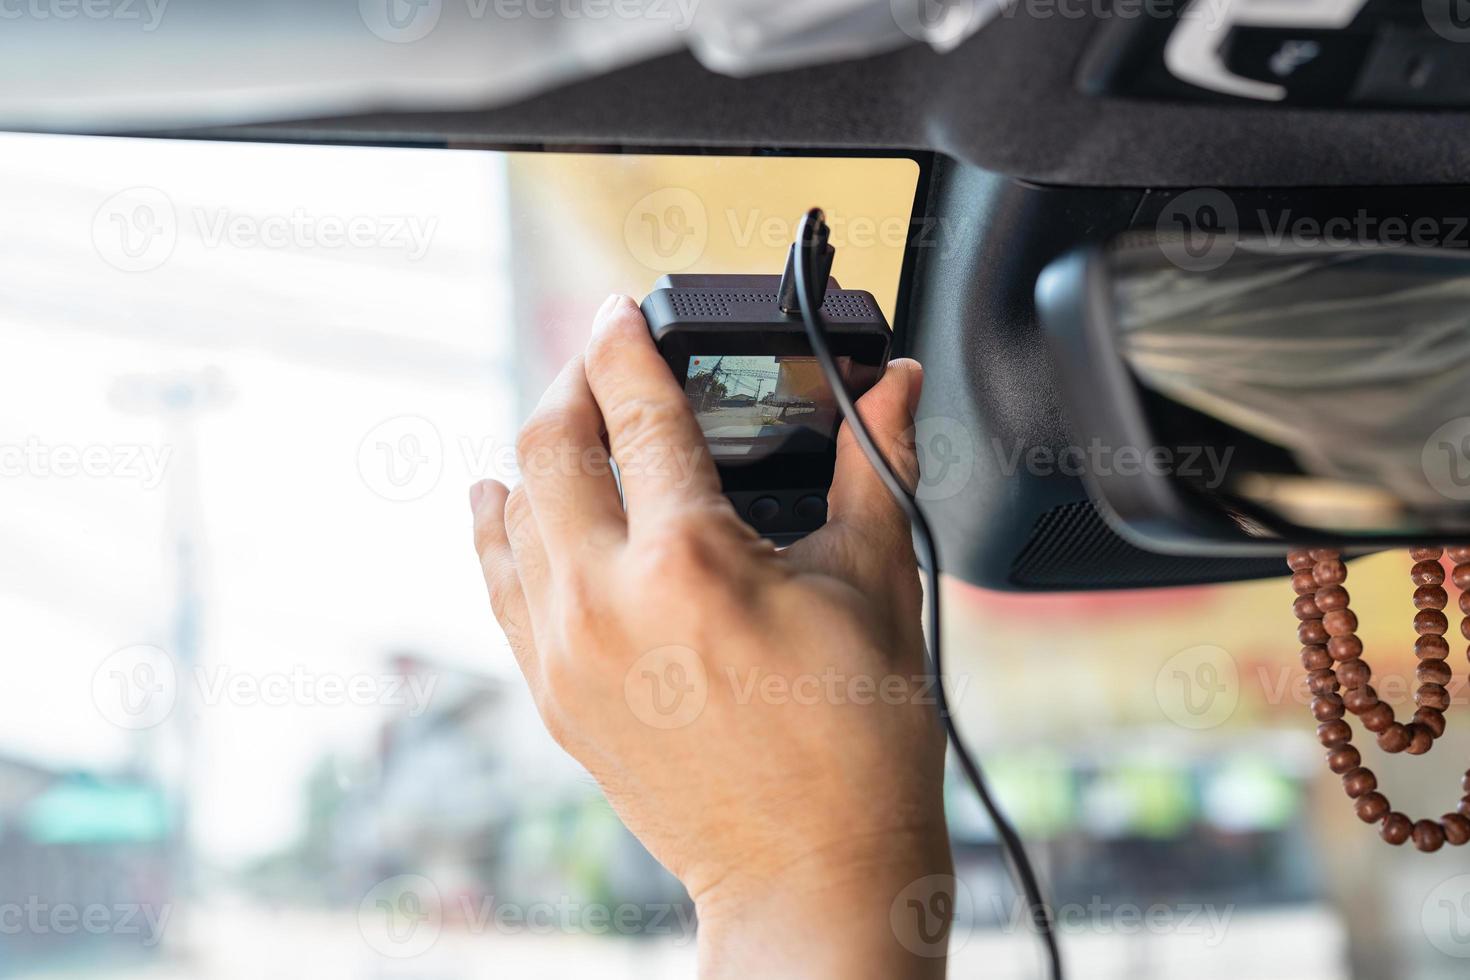 https://static.vecteezy.com/system/resources/previews/018/726/933/non_2x/hand-of-technician-installing-front-camera-car-recorder-on-windscreen-photo.jpg